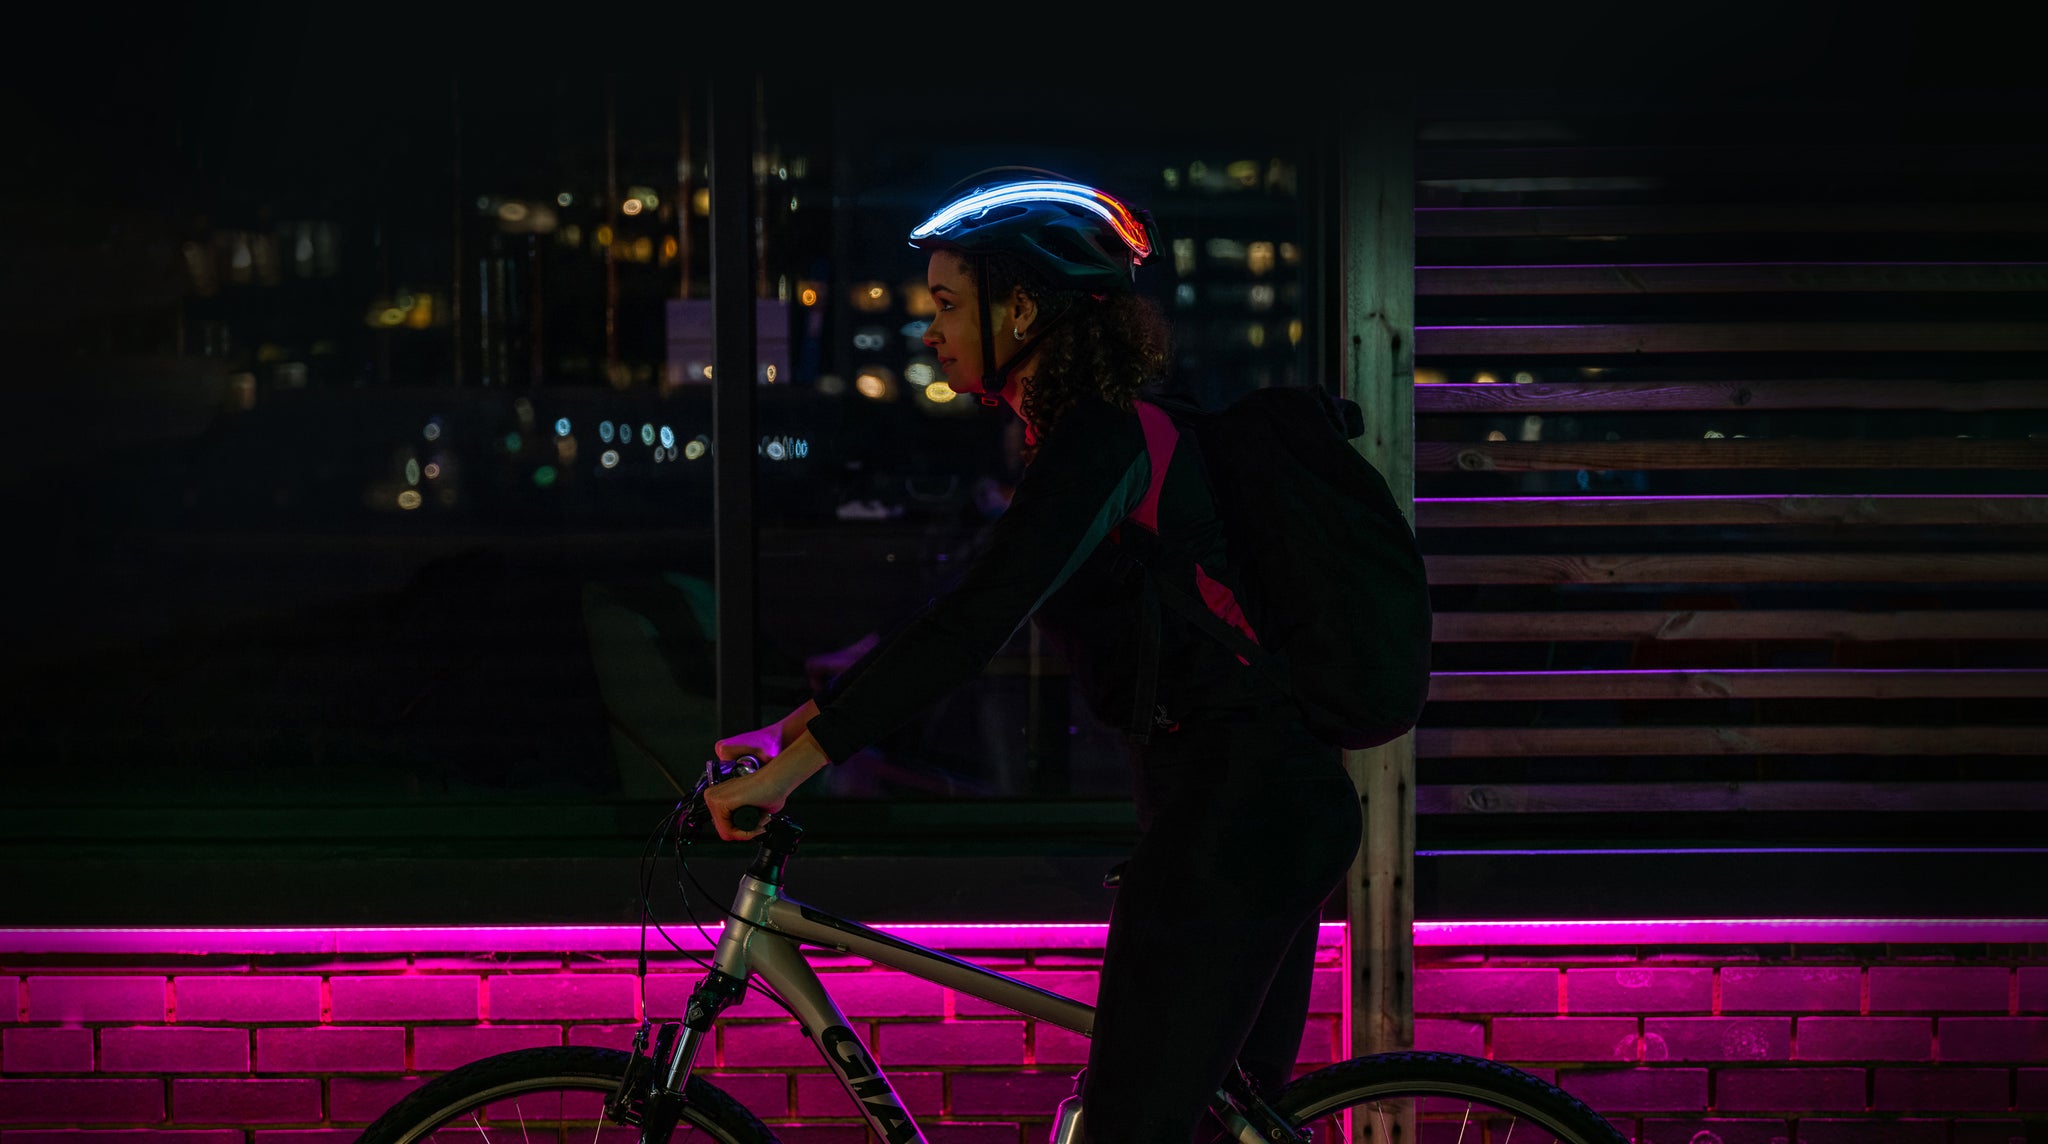 Female on bike with NightBlaz attached to her cycle helmet